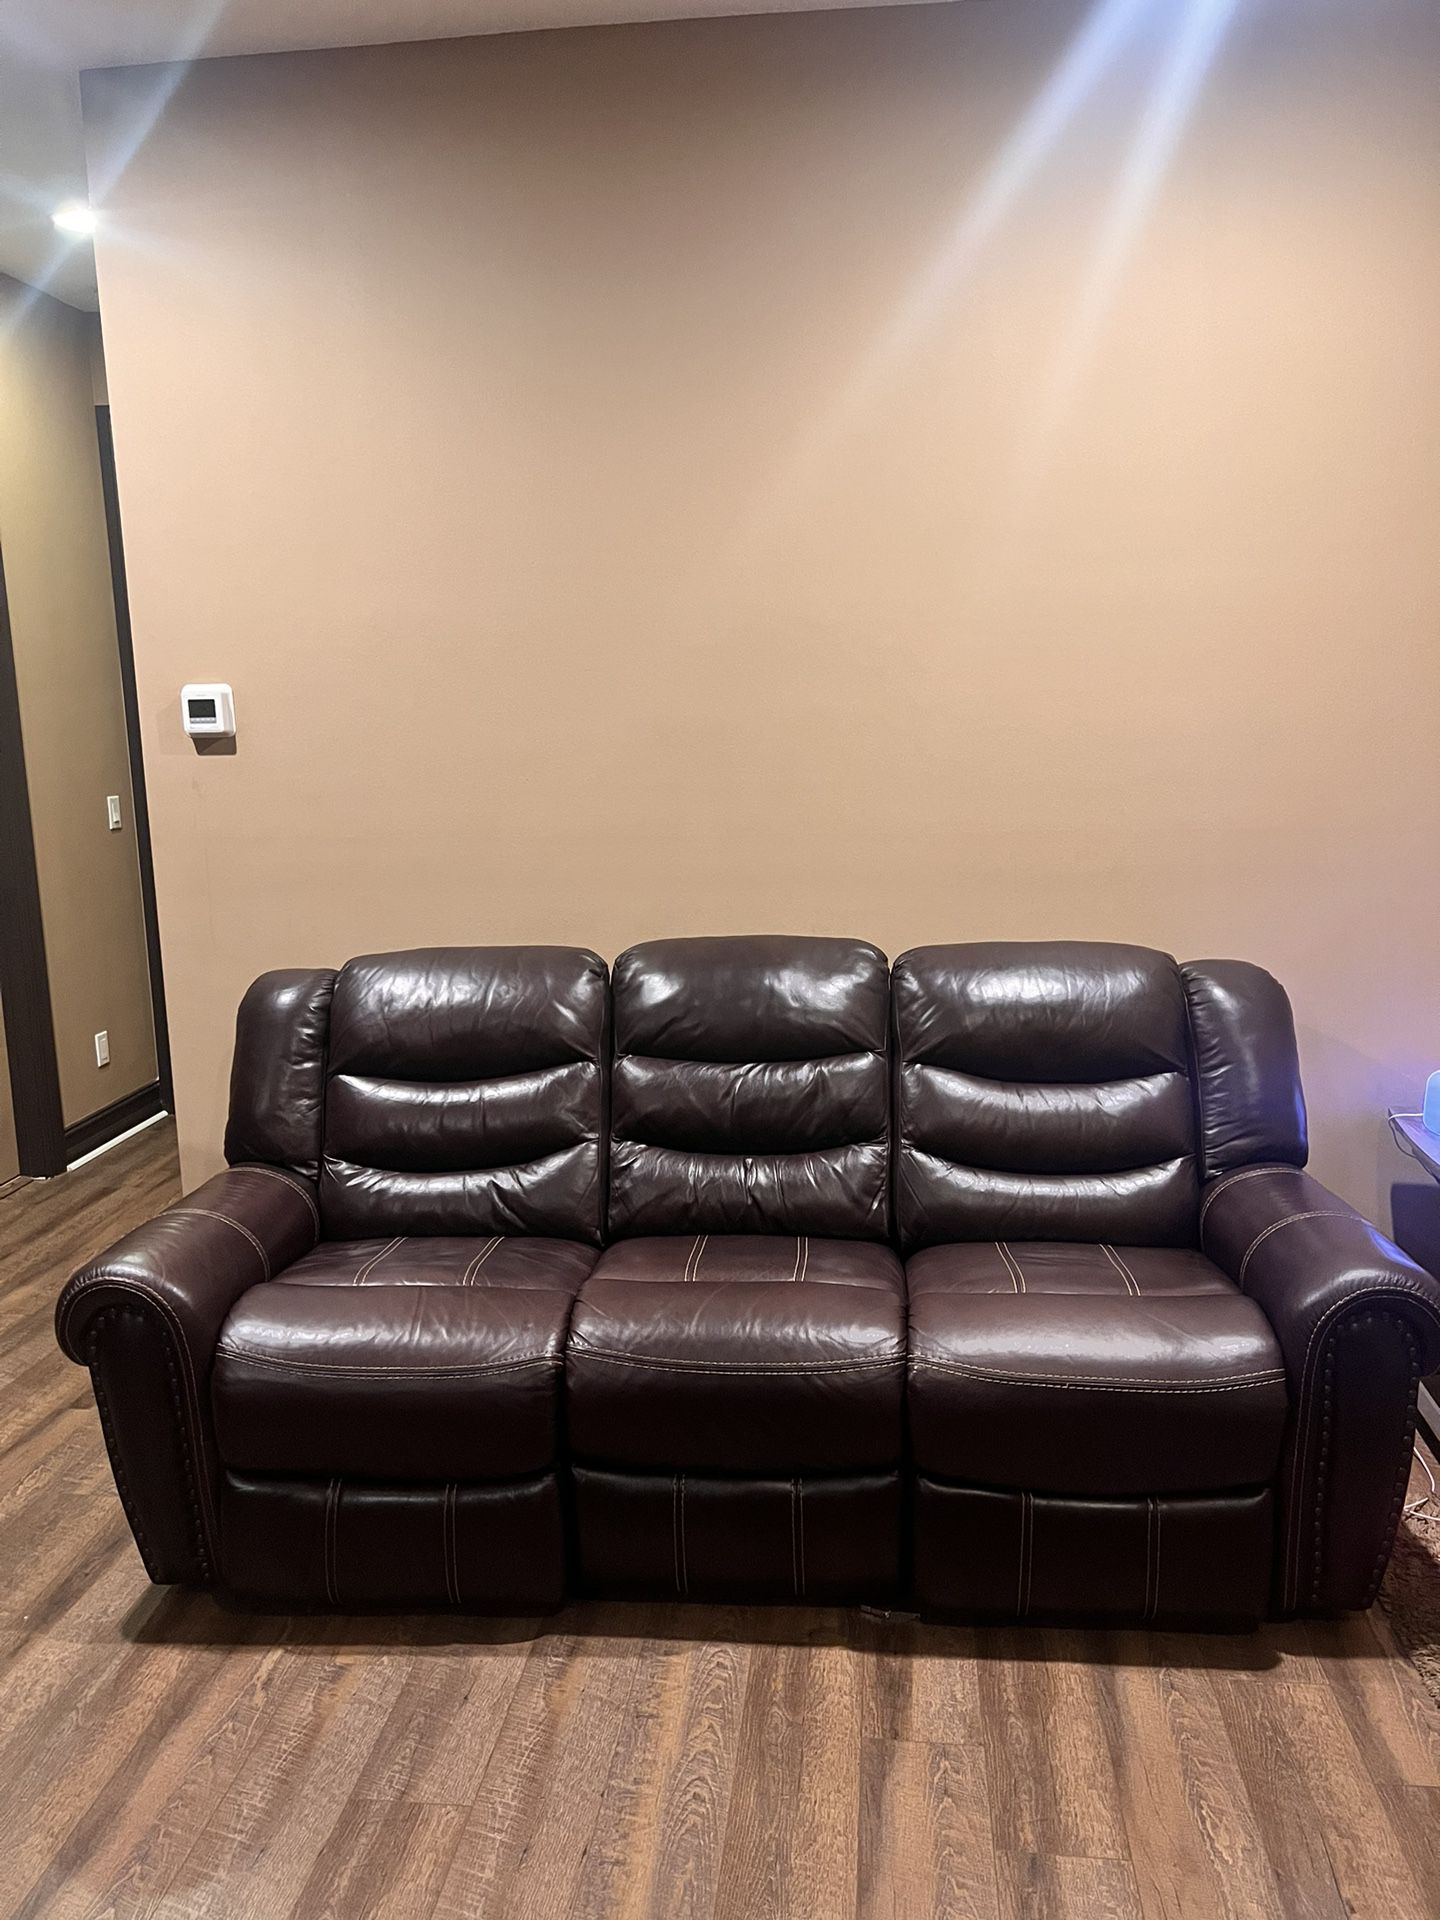 Reclining Leather Sofa Flash Sell